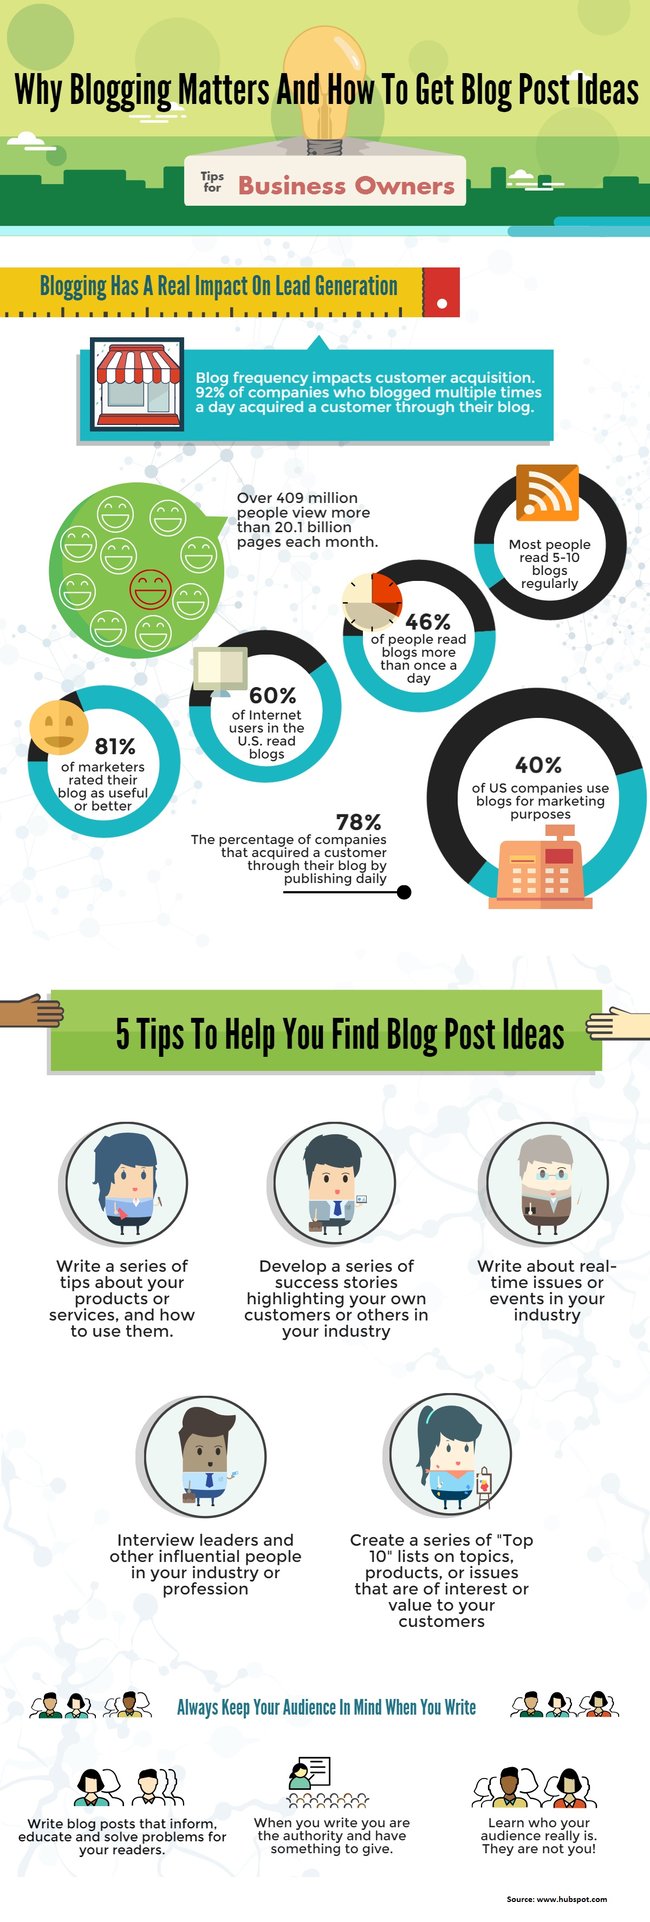 business-blogging-and-5-tips-for-getting-ideas-infographic